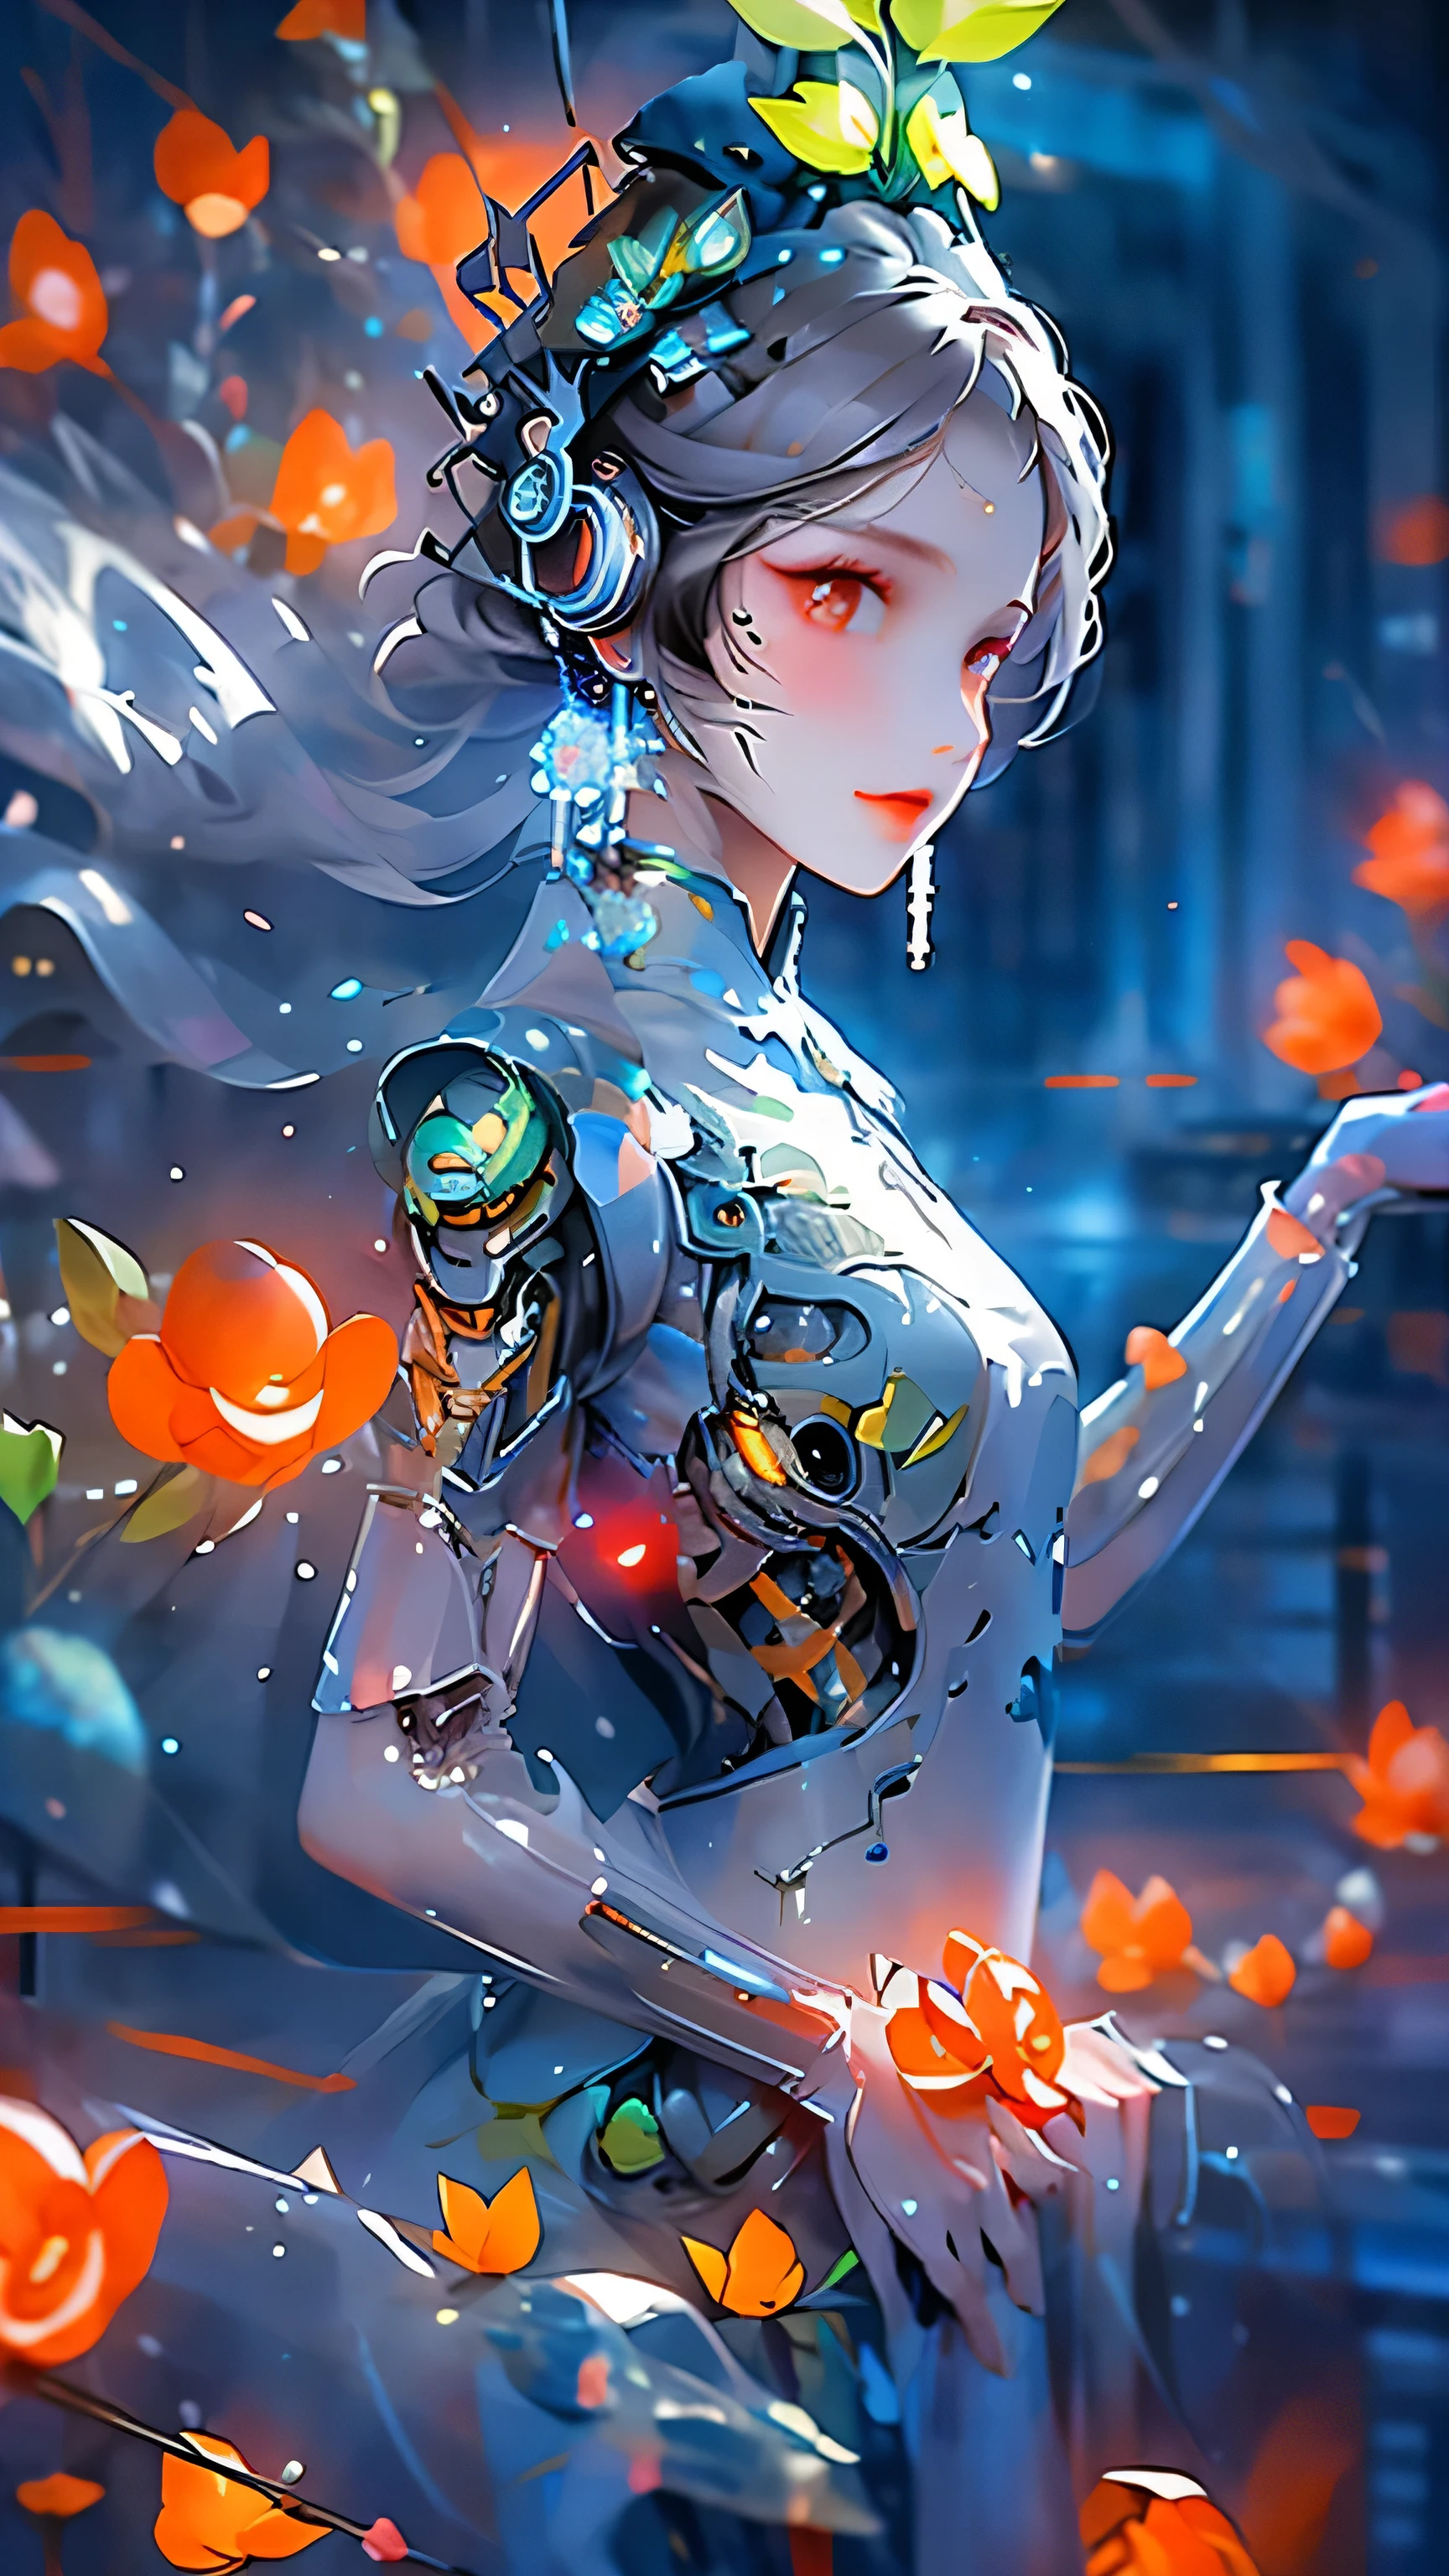 1 girl, Chinese_clothing, liquid silver and Tangerine, Cyberhan, cheongsam, Cyberpunk city, Dynamic poses, Detailed glowing headphones, Luminous hair accessories, long hair, Luminous earringss, Glowing necklace, Cyberpunk, 高science and technology城, full of mechanical and Futuristic elements, Futuristic, science and technology, glowing neon lights, Tangerine, Tangerine light, Transparent Tulle, Transparent ribbon, laser, digital background city sky, Big Moon, There is a car, best quality, masterpiece, 8K, Character Rim Light, Ultra-high detail, high quality, The most beautiful woman in the world, Smile, Forward facing and symmetrical, earrings, Beautiful student, Lighting effects, visual data, Silver hair, Ultra-fine facial texture